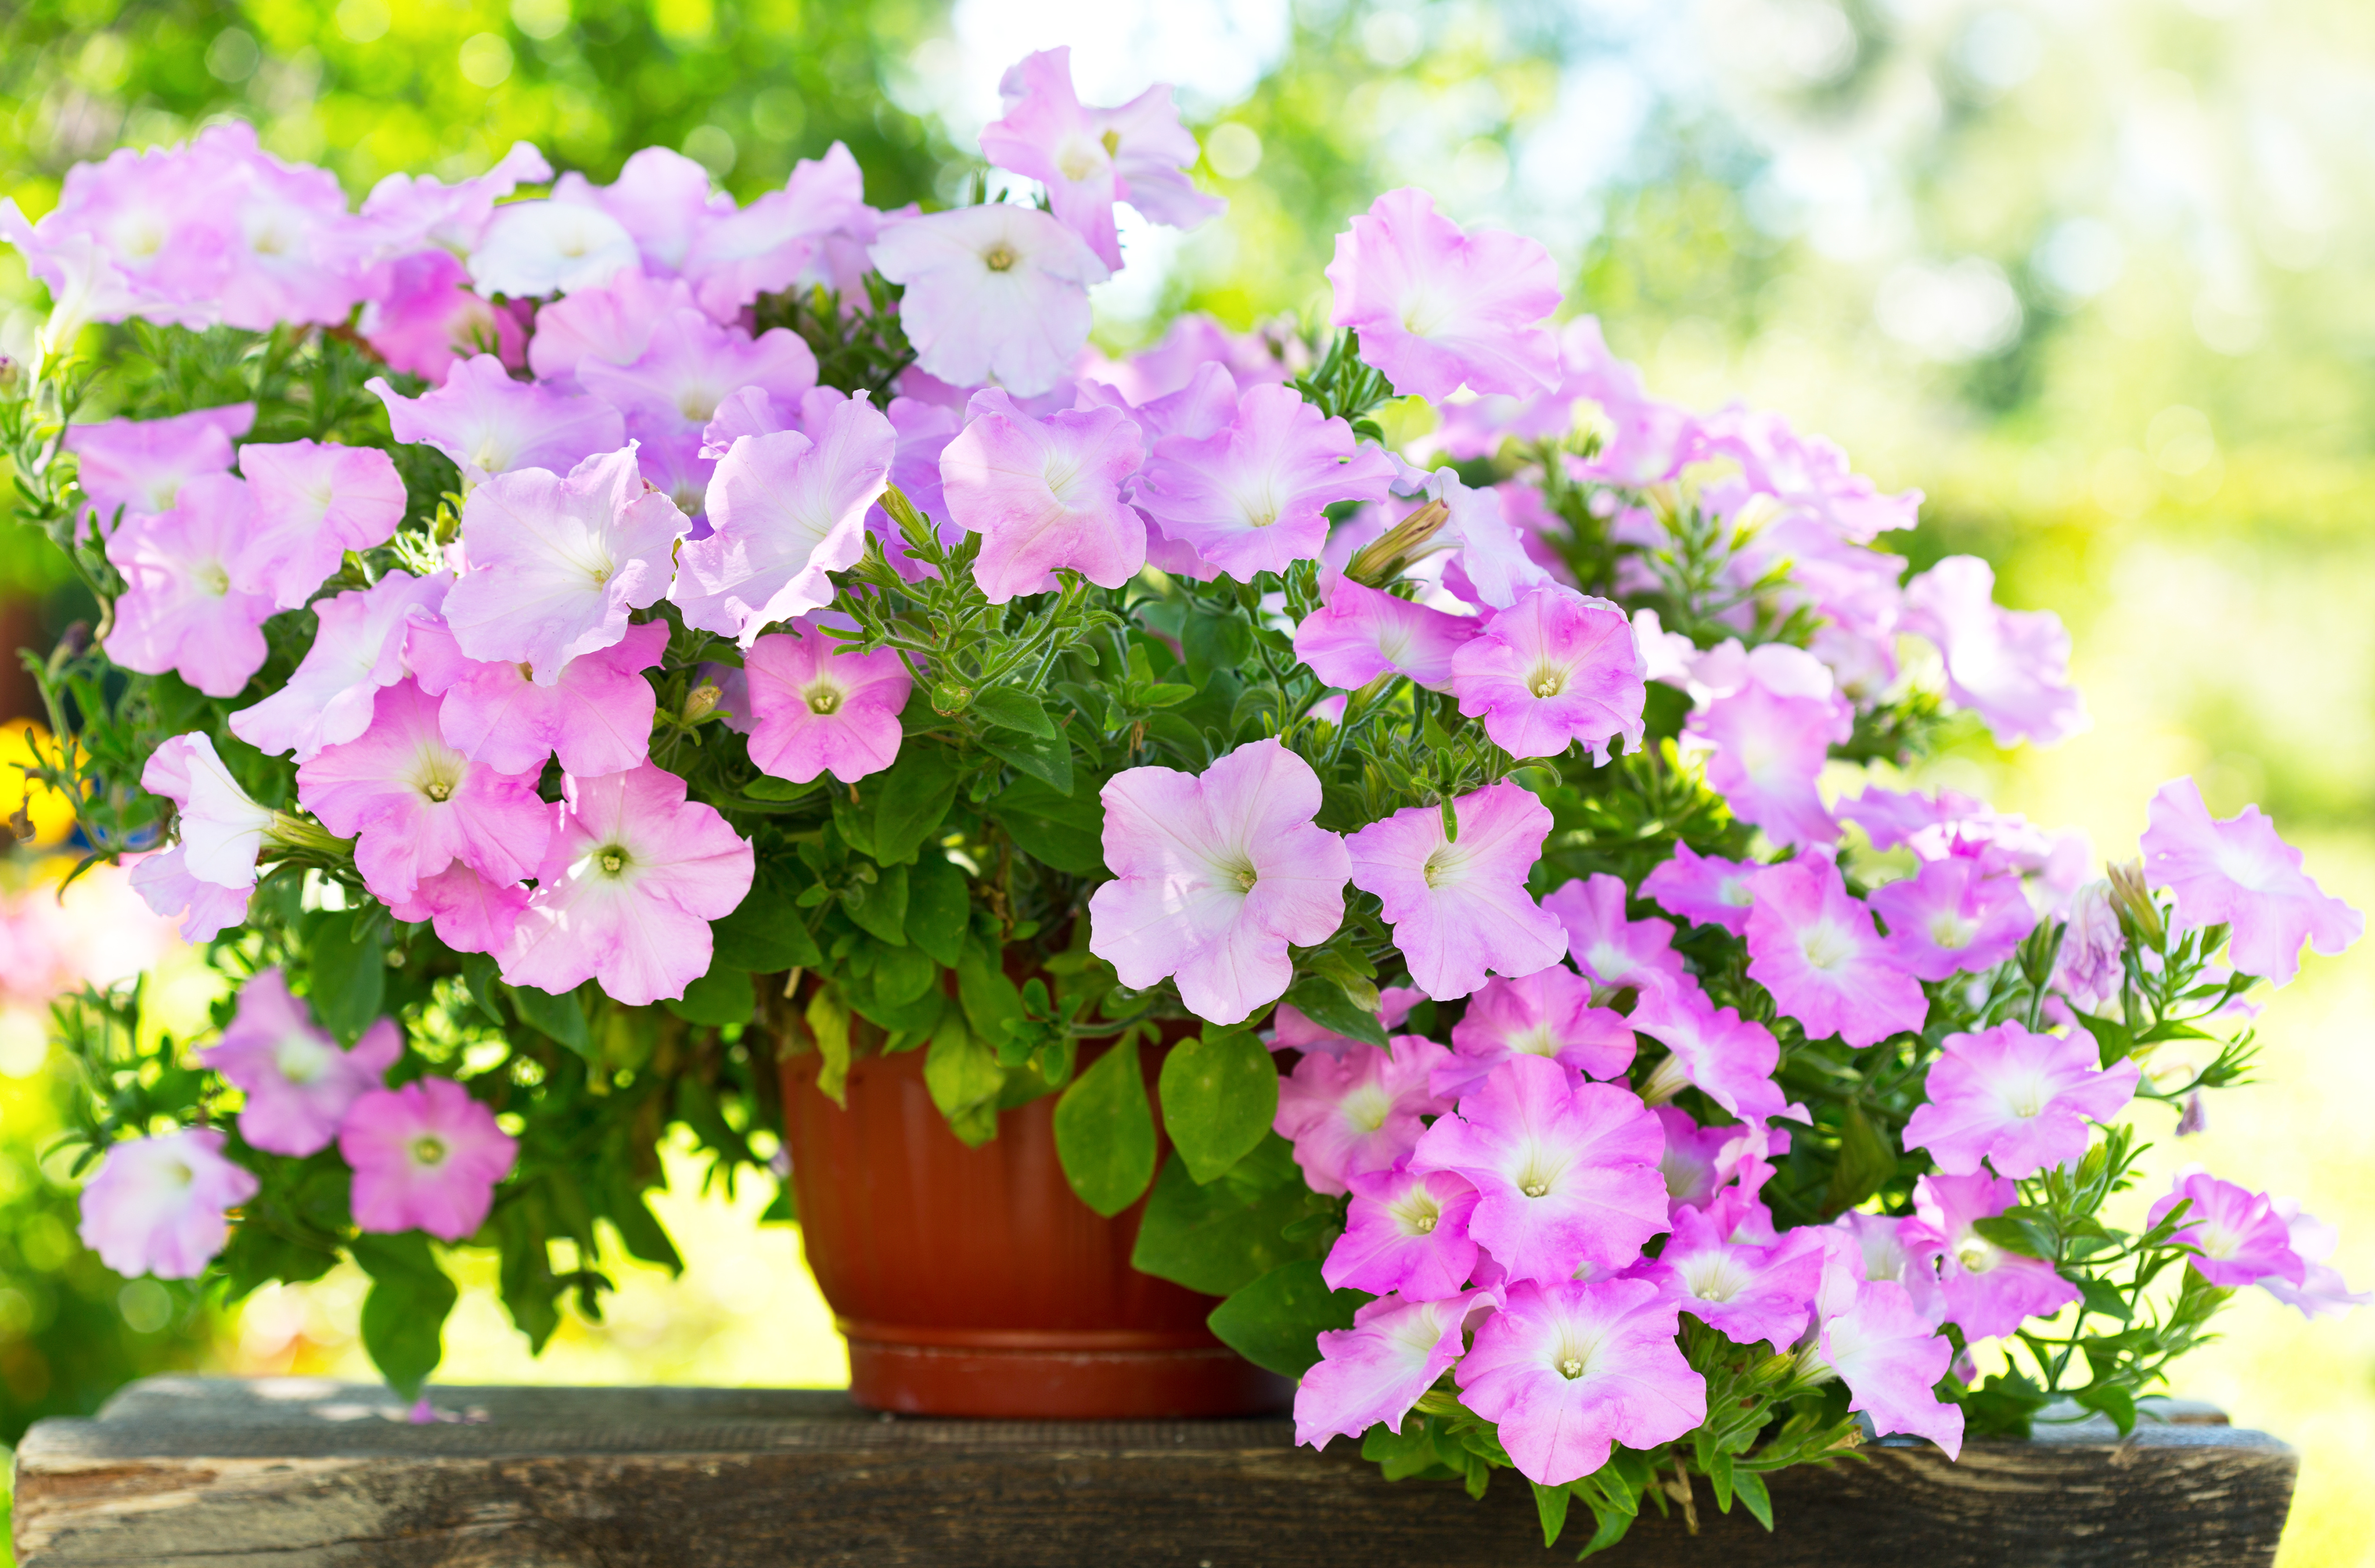 The Best Way to Water Your Petunia